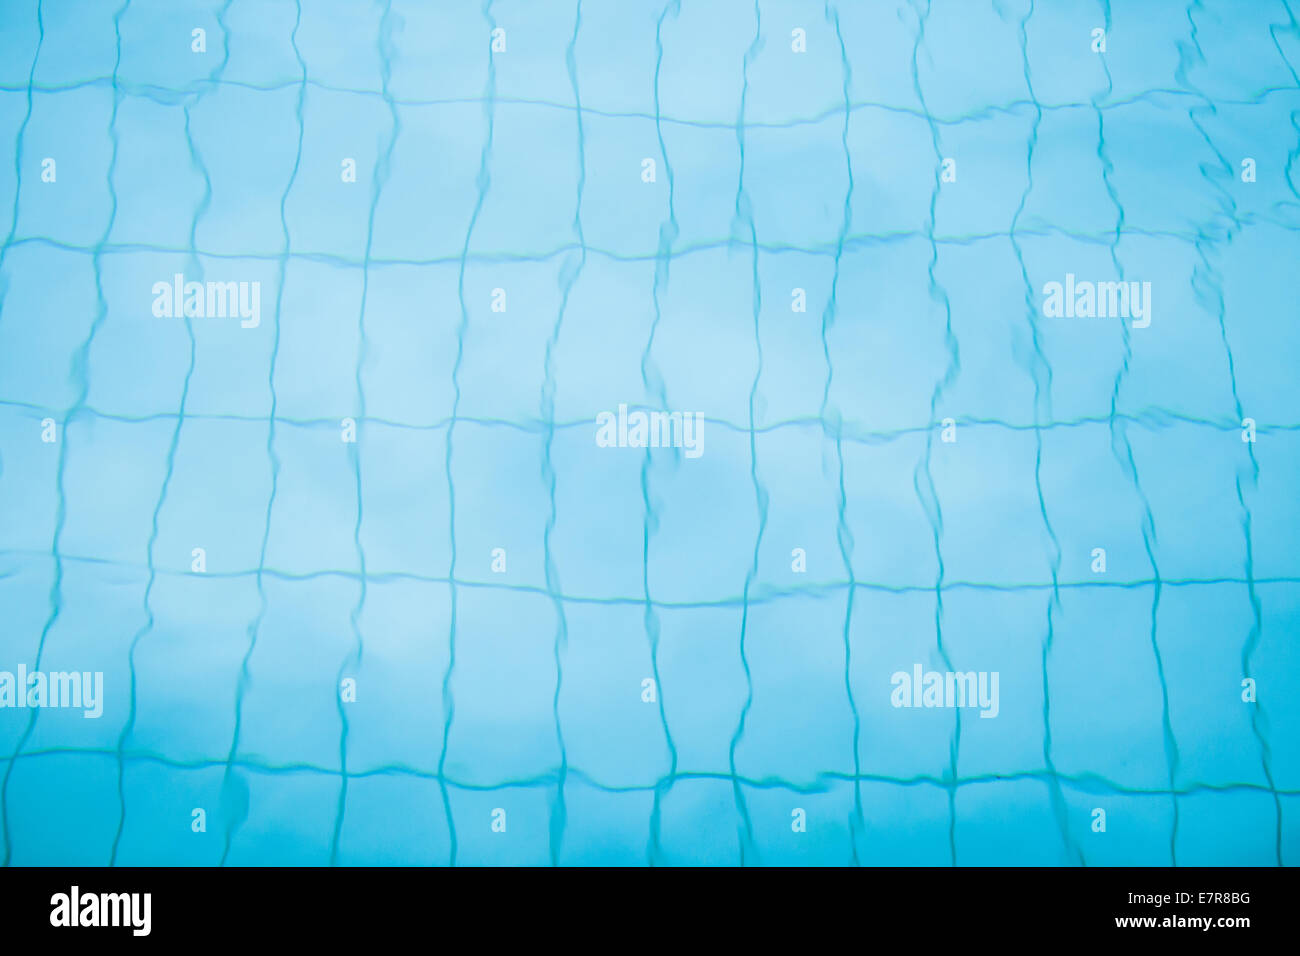 Tiles on bottom of swimming pool distorted slightly by water for background image Stock Photo